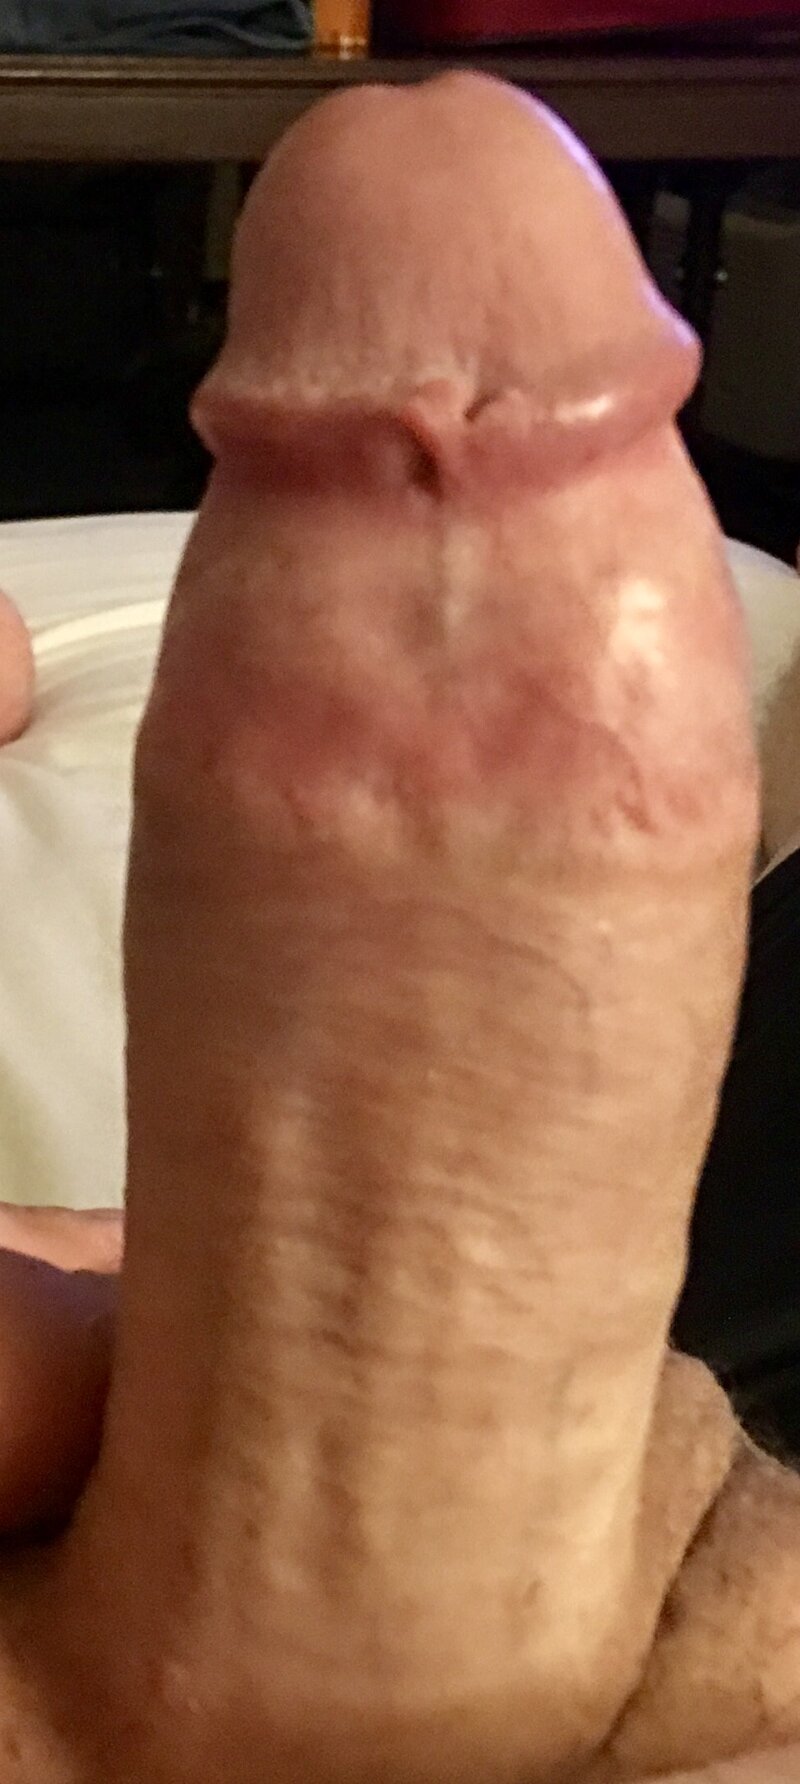 My Cock picture